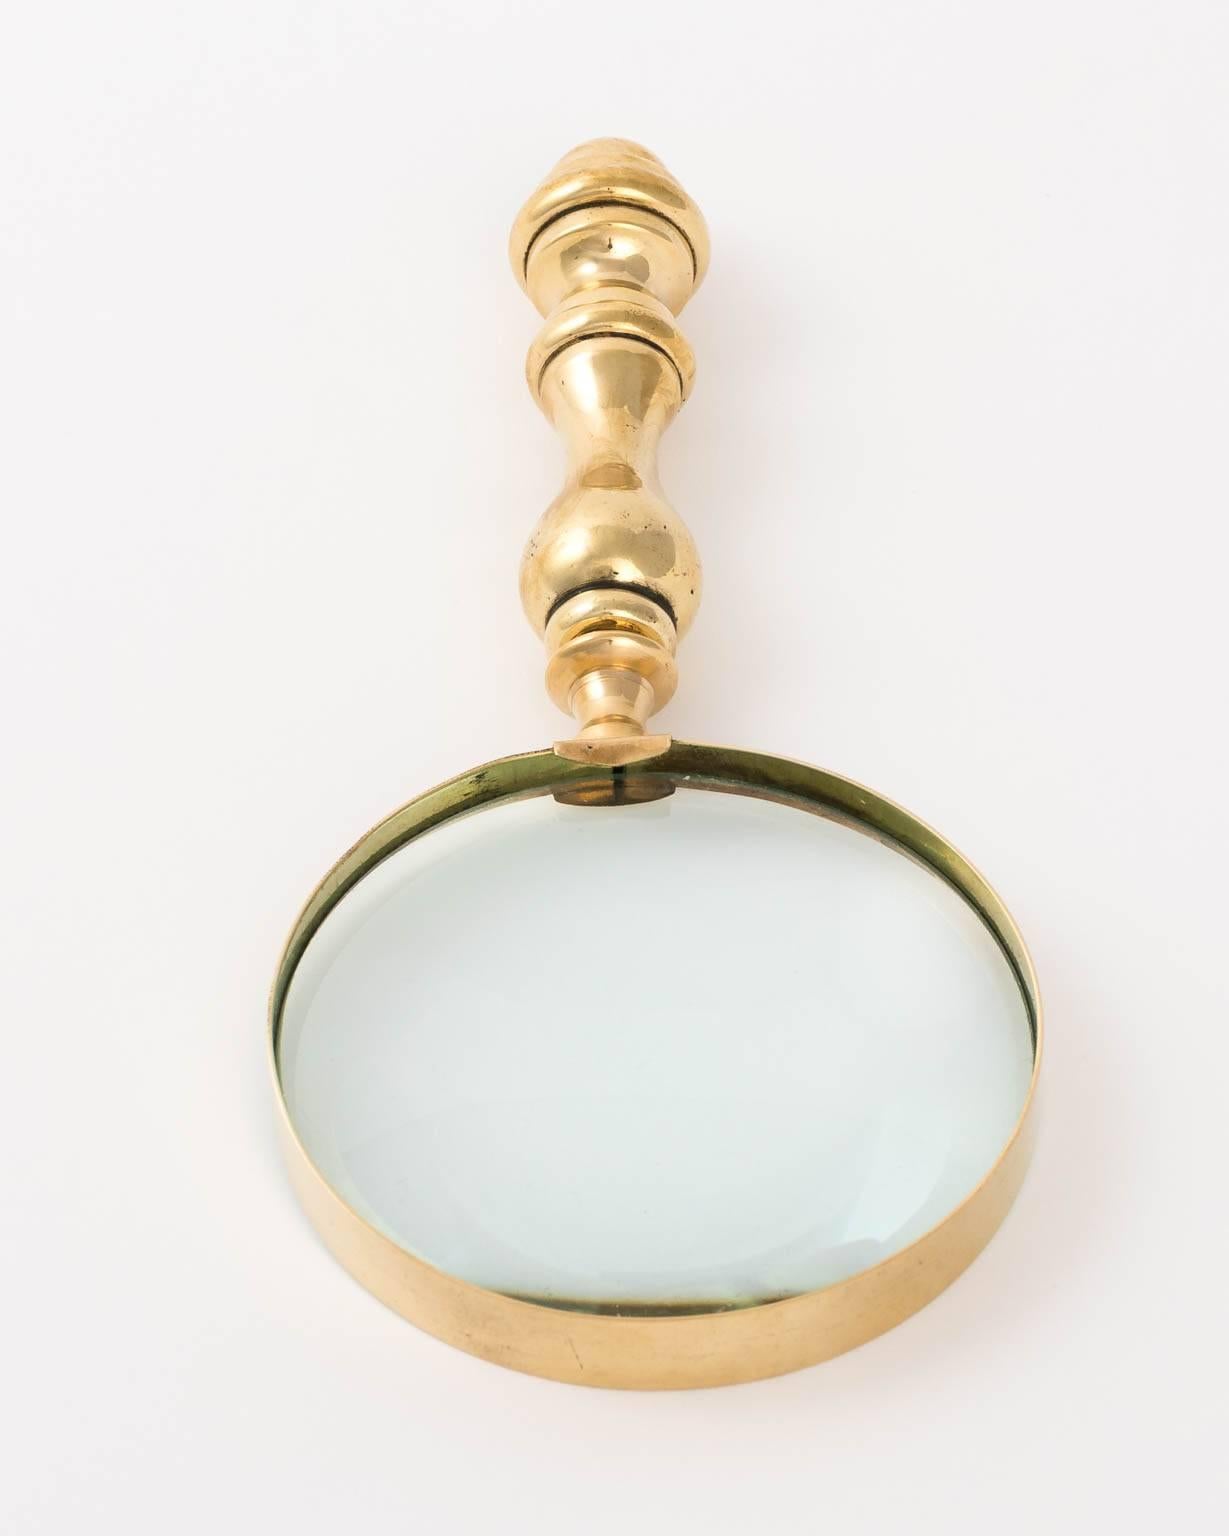 English brass magnifying glass in a polished finish with a vase-and-ring styled handle, circa 1890.
 